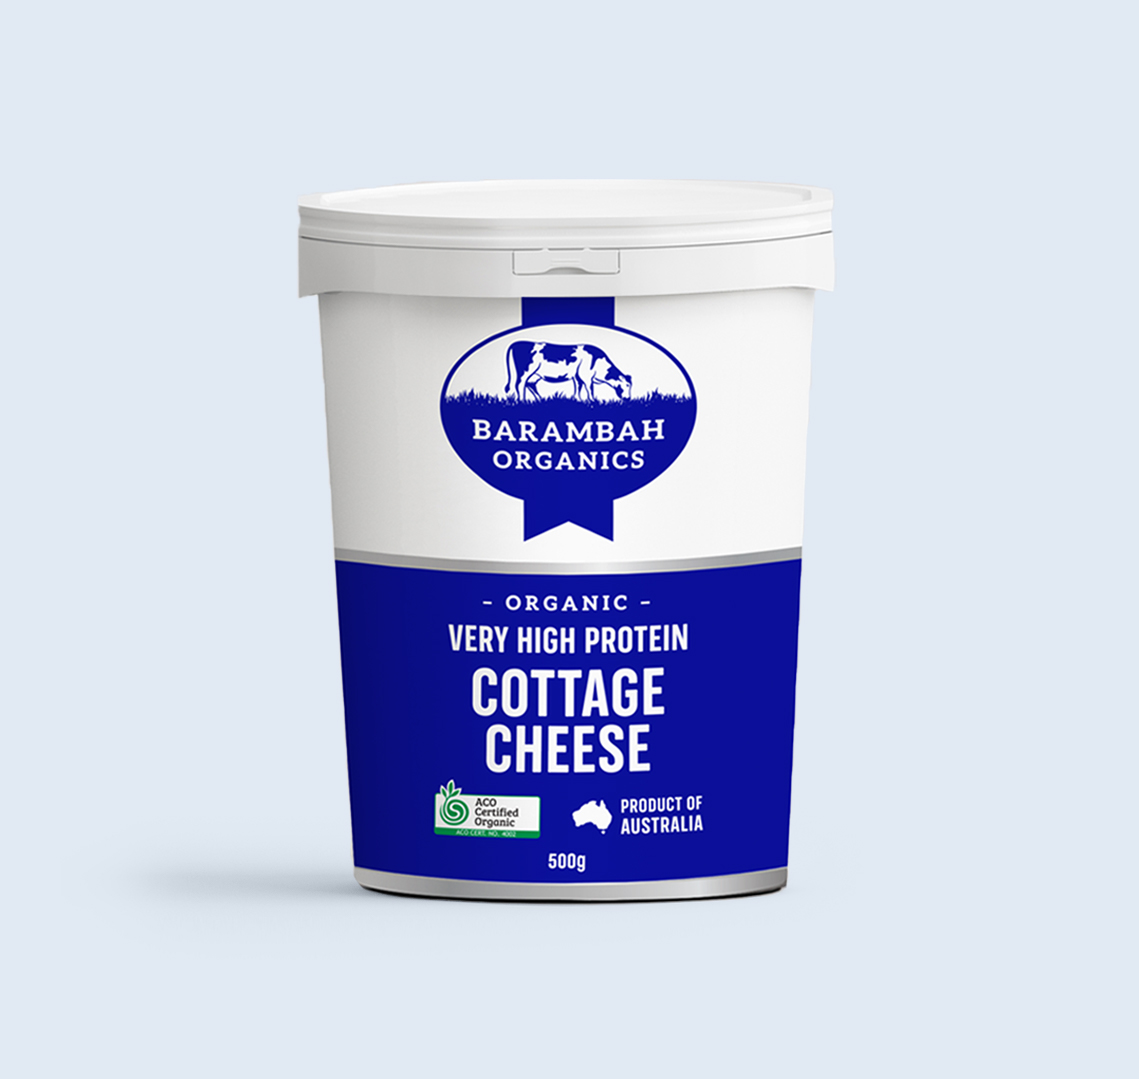 500g of Very High Protein Cottage Cheese - Organic Cottage Cheese - Barambah Organics